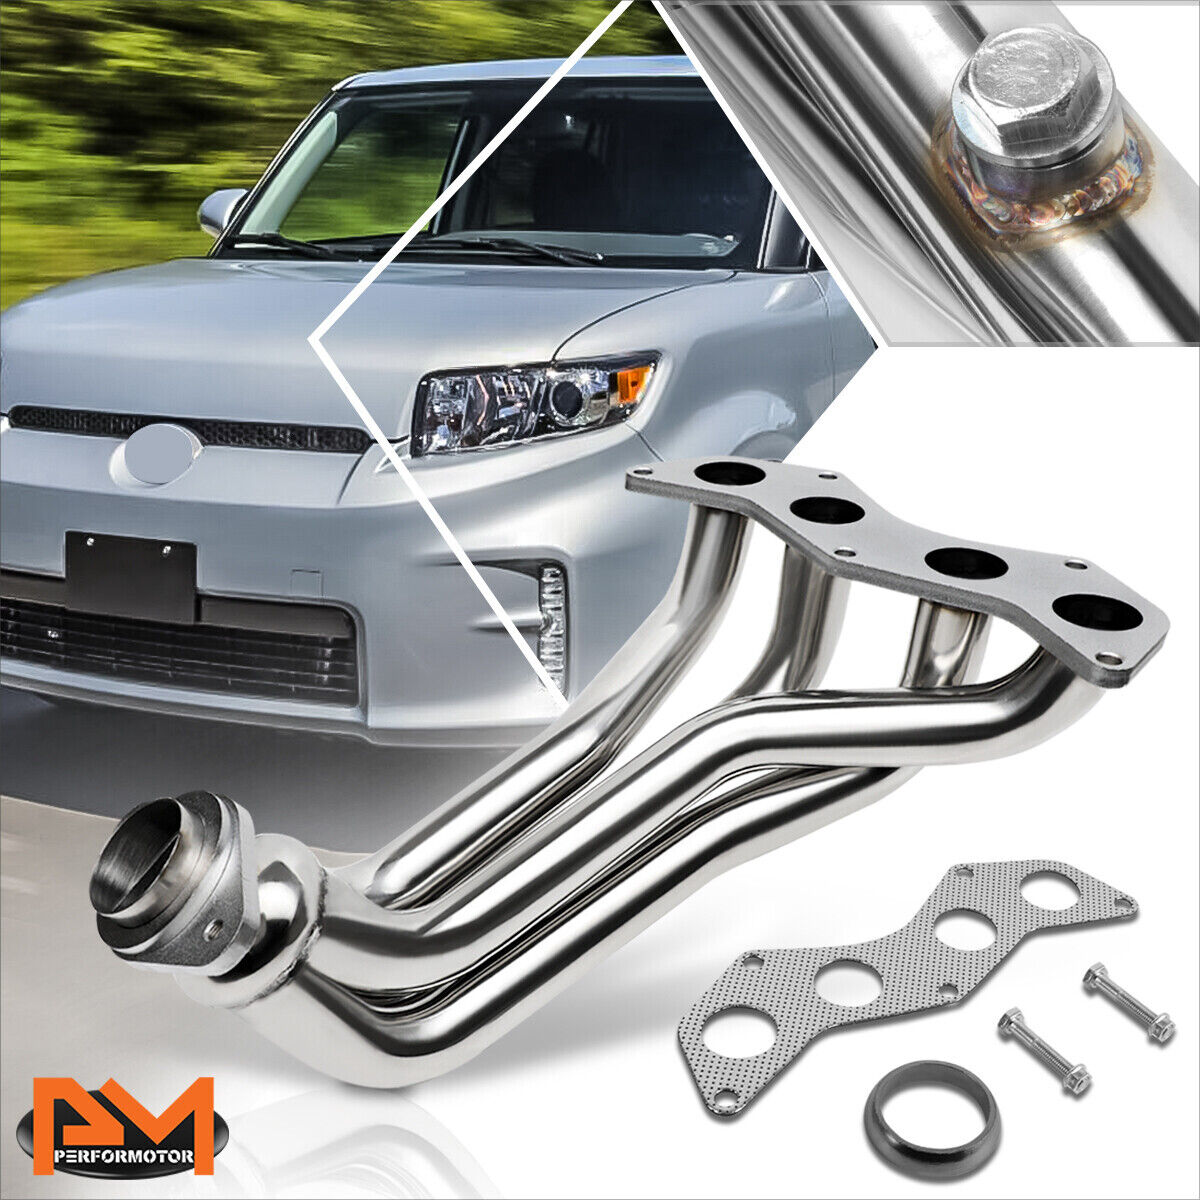 For 08-15 Scion xB 2.4 2AZ-FE 4Cyl Stainless Steel 4-1 Exhaust Header Manifold